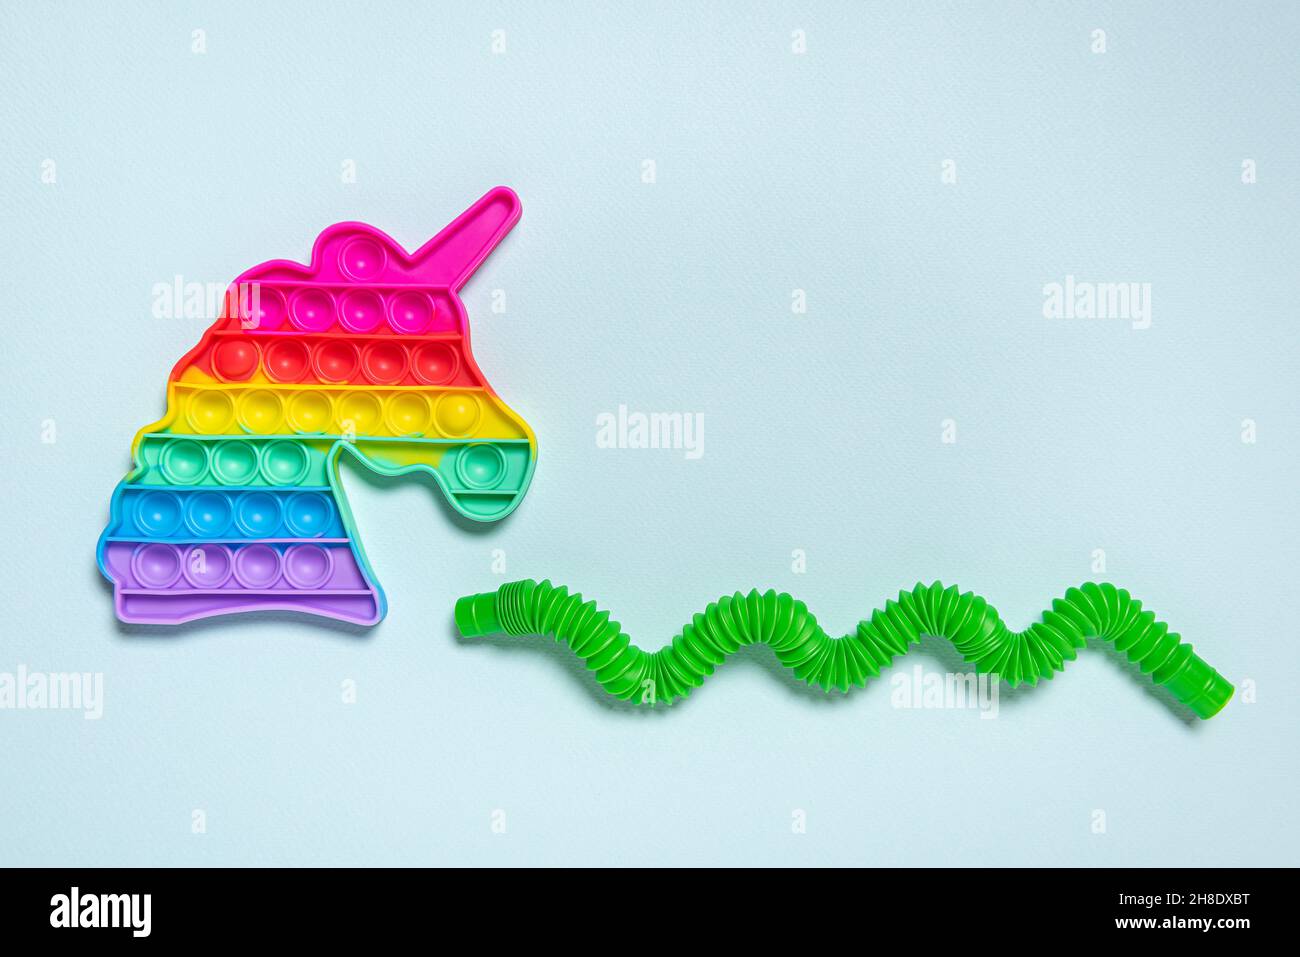 Rainbow unicorn and streched, bent in shape of wave green tube. Pop it children toys in different shapes. Plastic antistress multicolored toy set on b Stock Photo